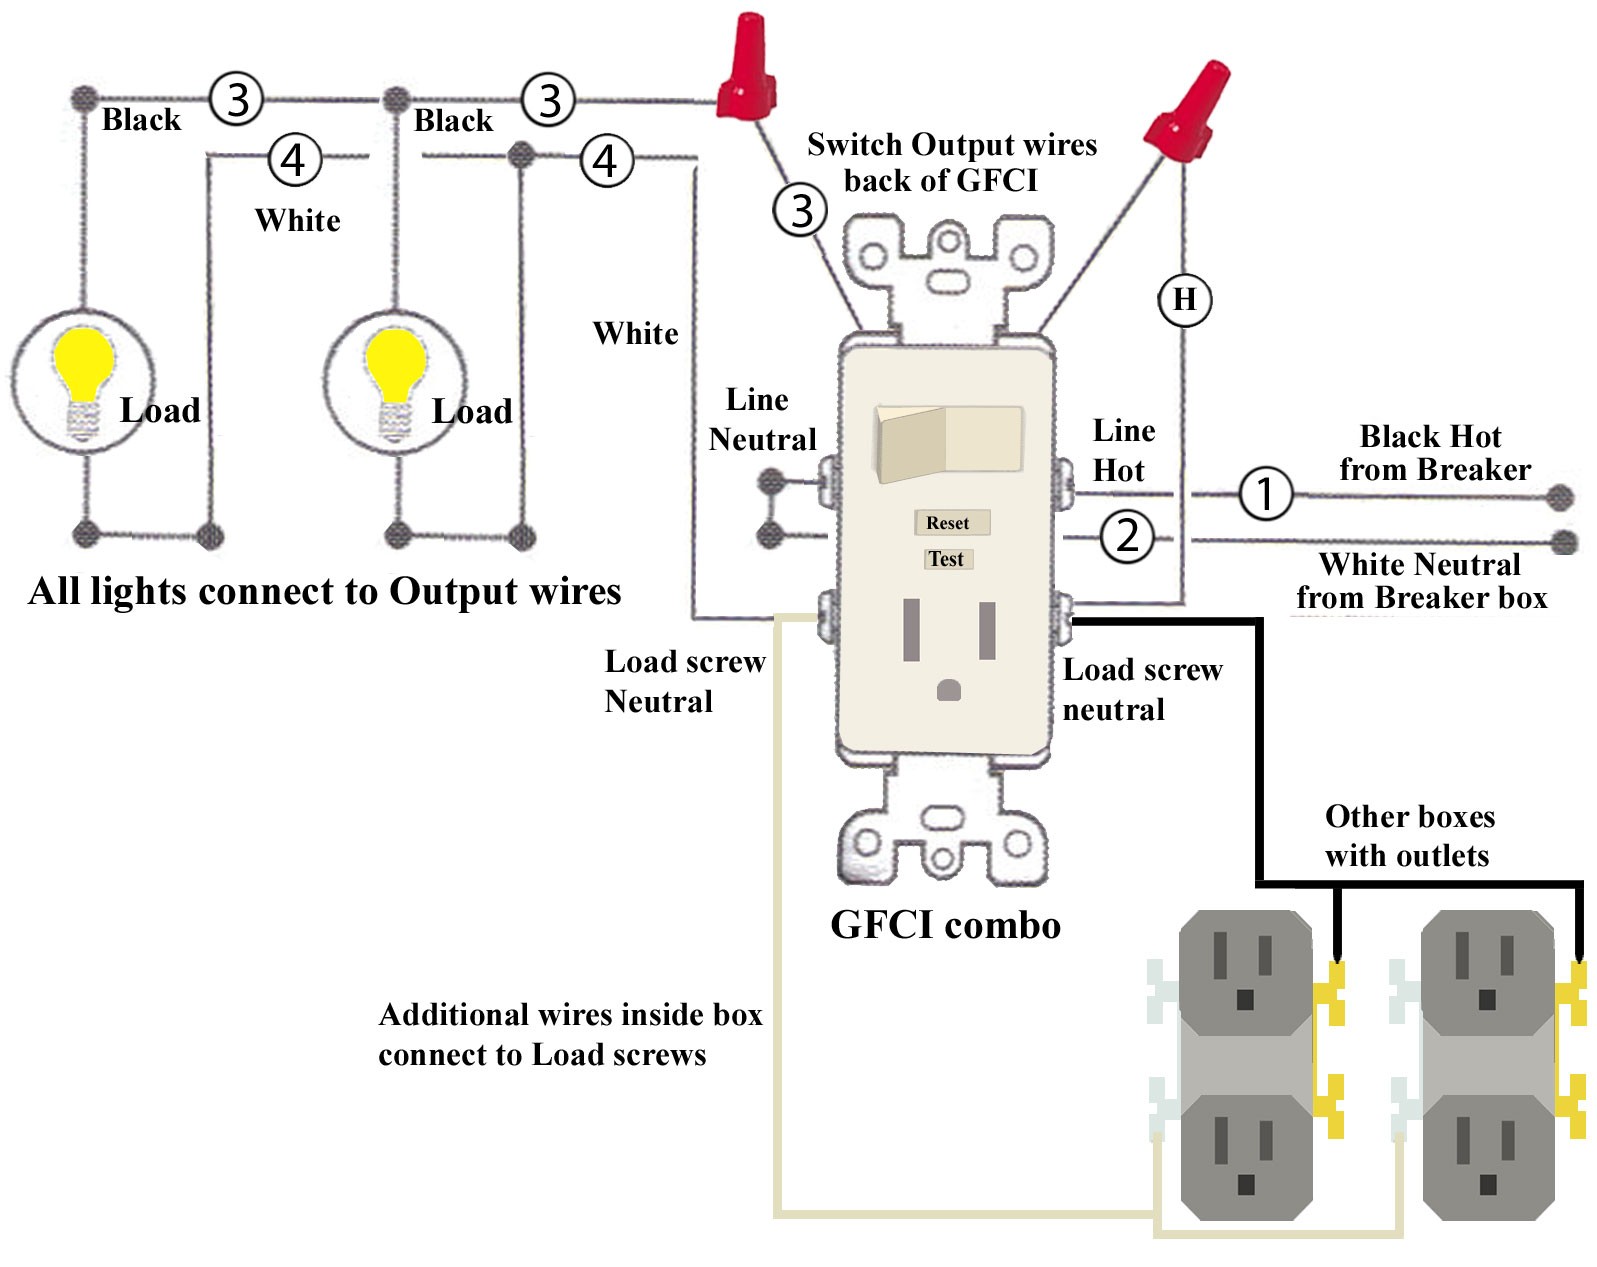 Cooper Gfci Wiring Diagram Wiring Diagrams Schematics GFCI Circuit Diagram Cooper Gfci Wiring Diagram Source gfci outlet switch